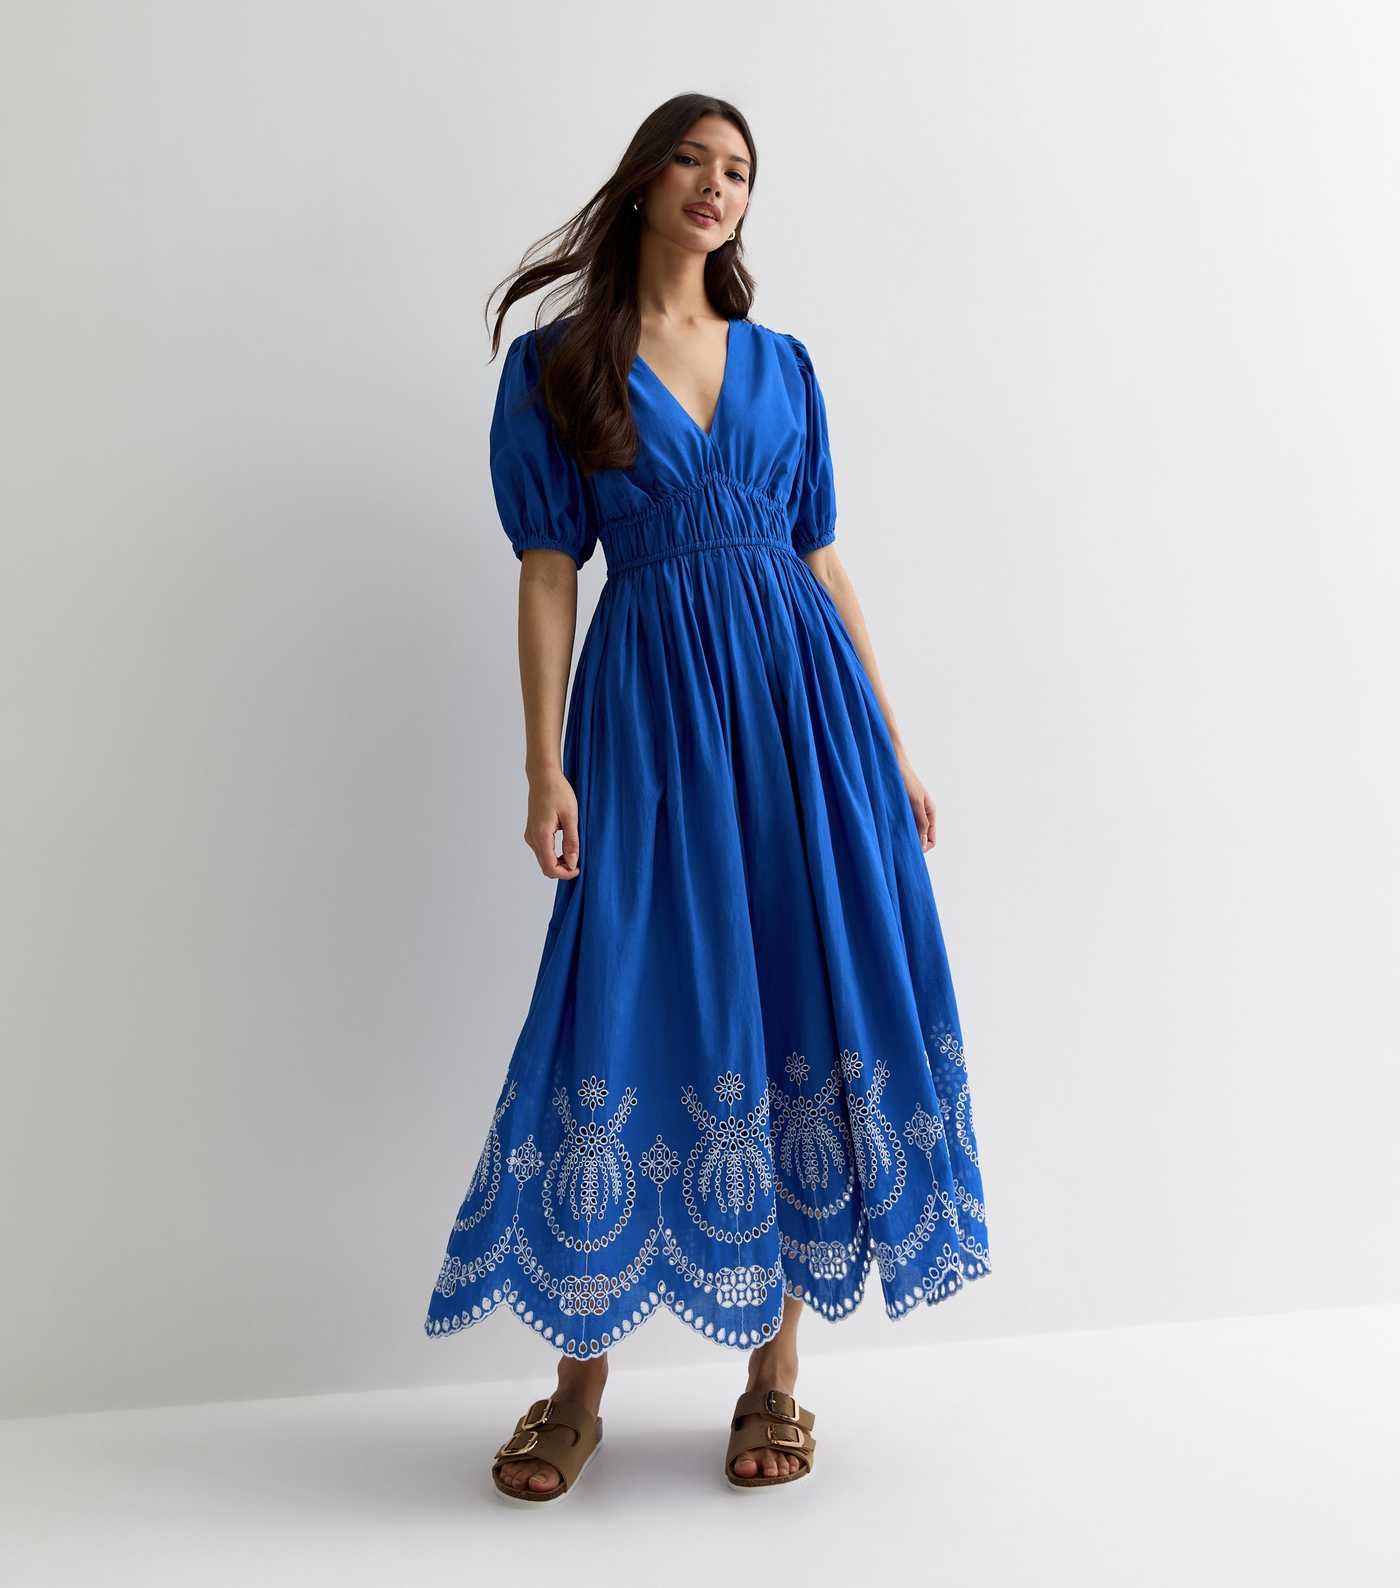 Bright Blue Cotton Broderie Hem Midi Dress
						
						Add to Saved Items
						Remove from Save... | New Look (UK)